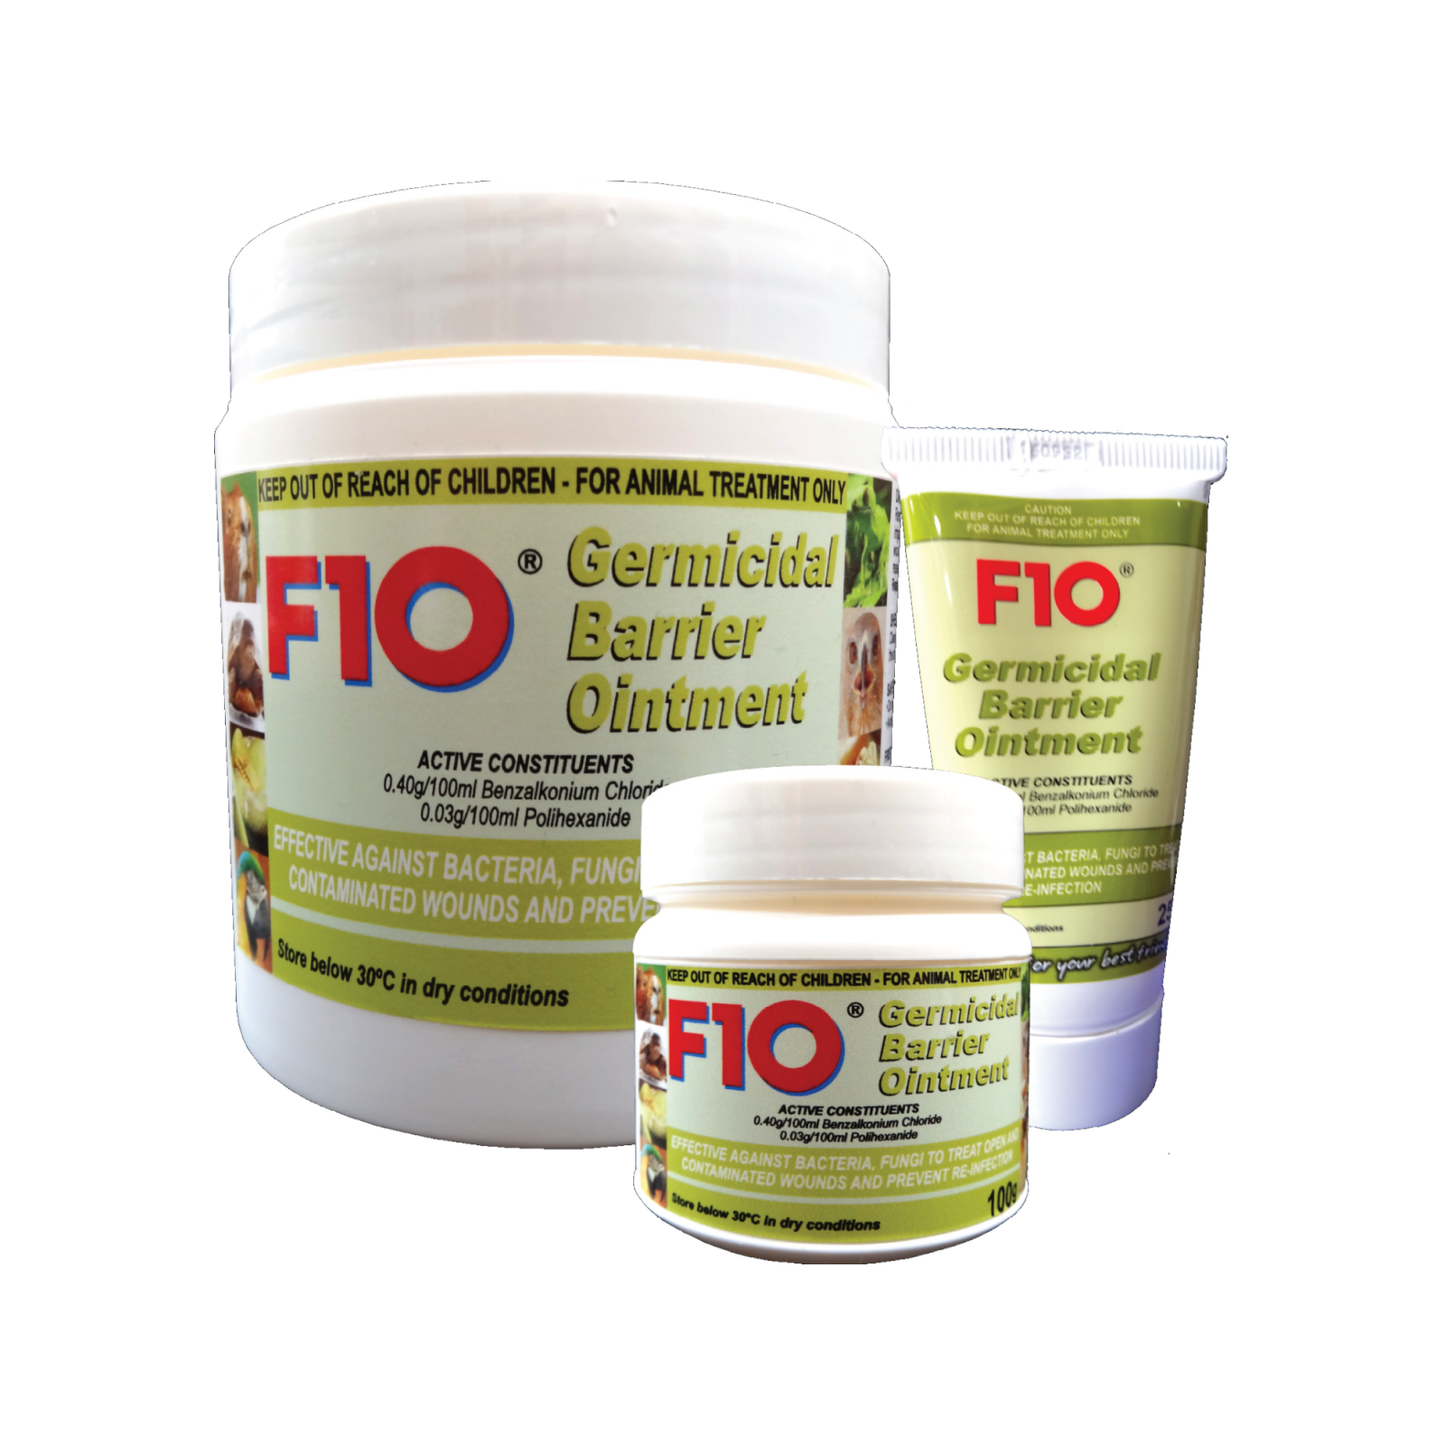 A 500g tub, 100g tub and 25g tube of F10 Germidical Barrier Ointment 